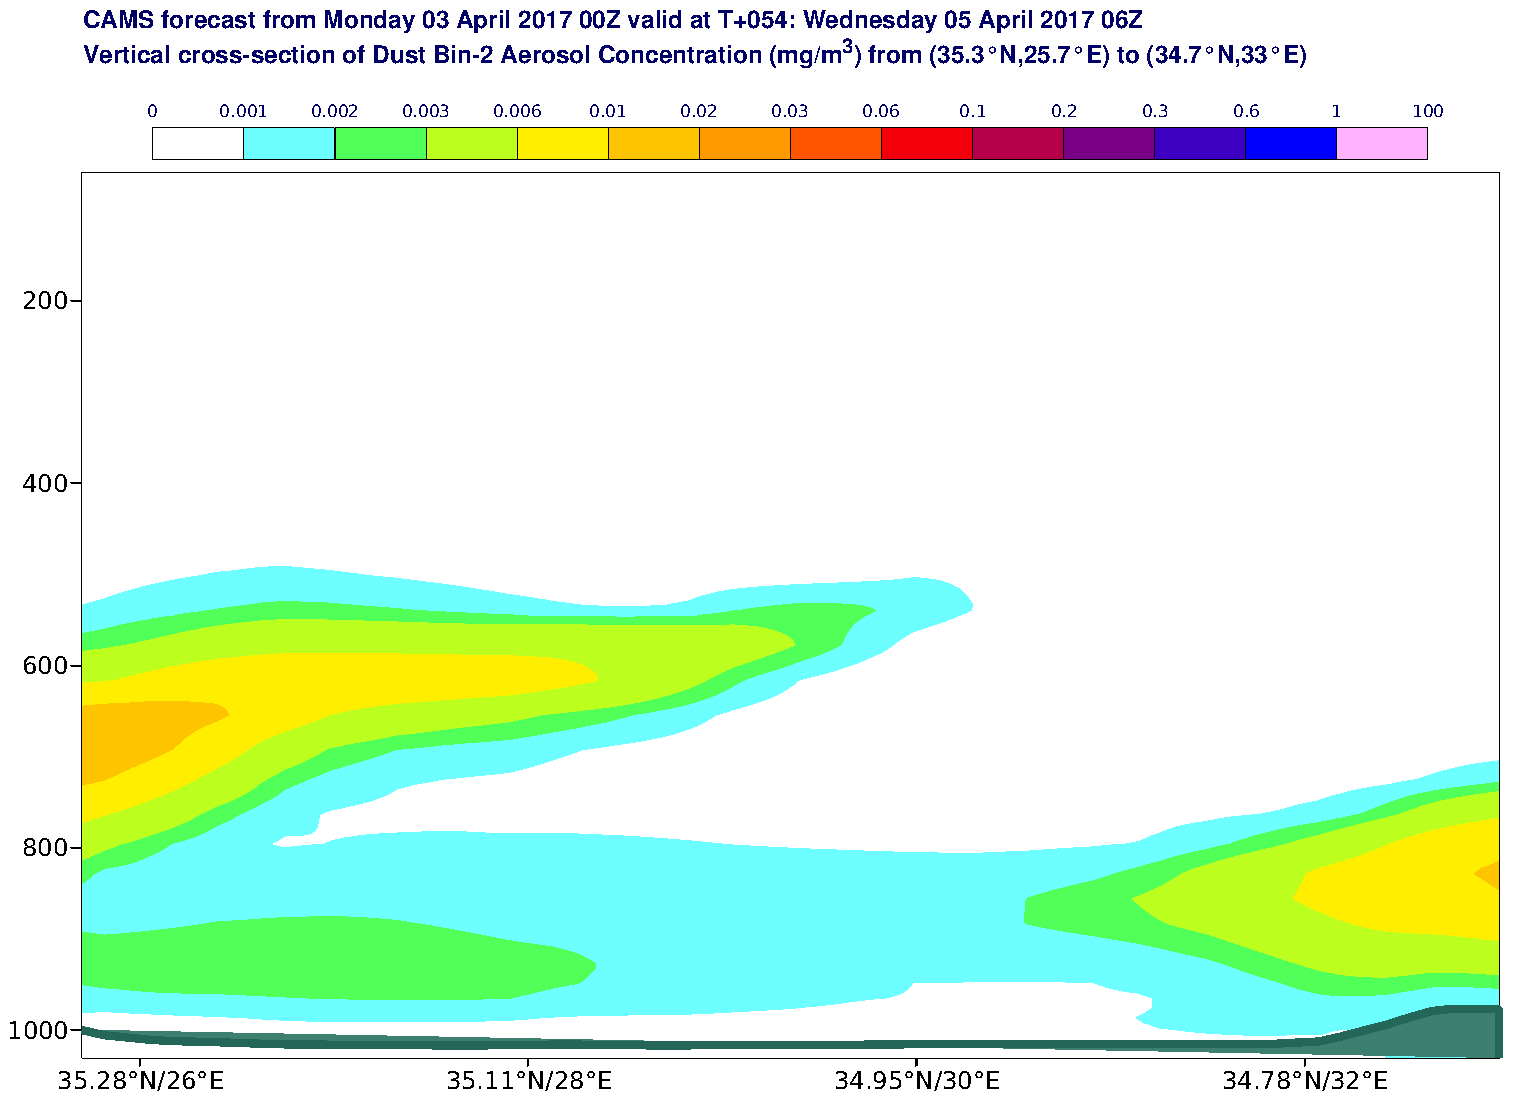 Vertical cross-section of Dust Bin-2 Aerosol Concentration (mg/m3) valid at T54 - 2017-04-05 06:00